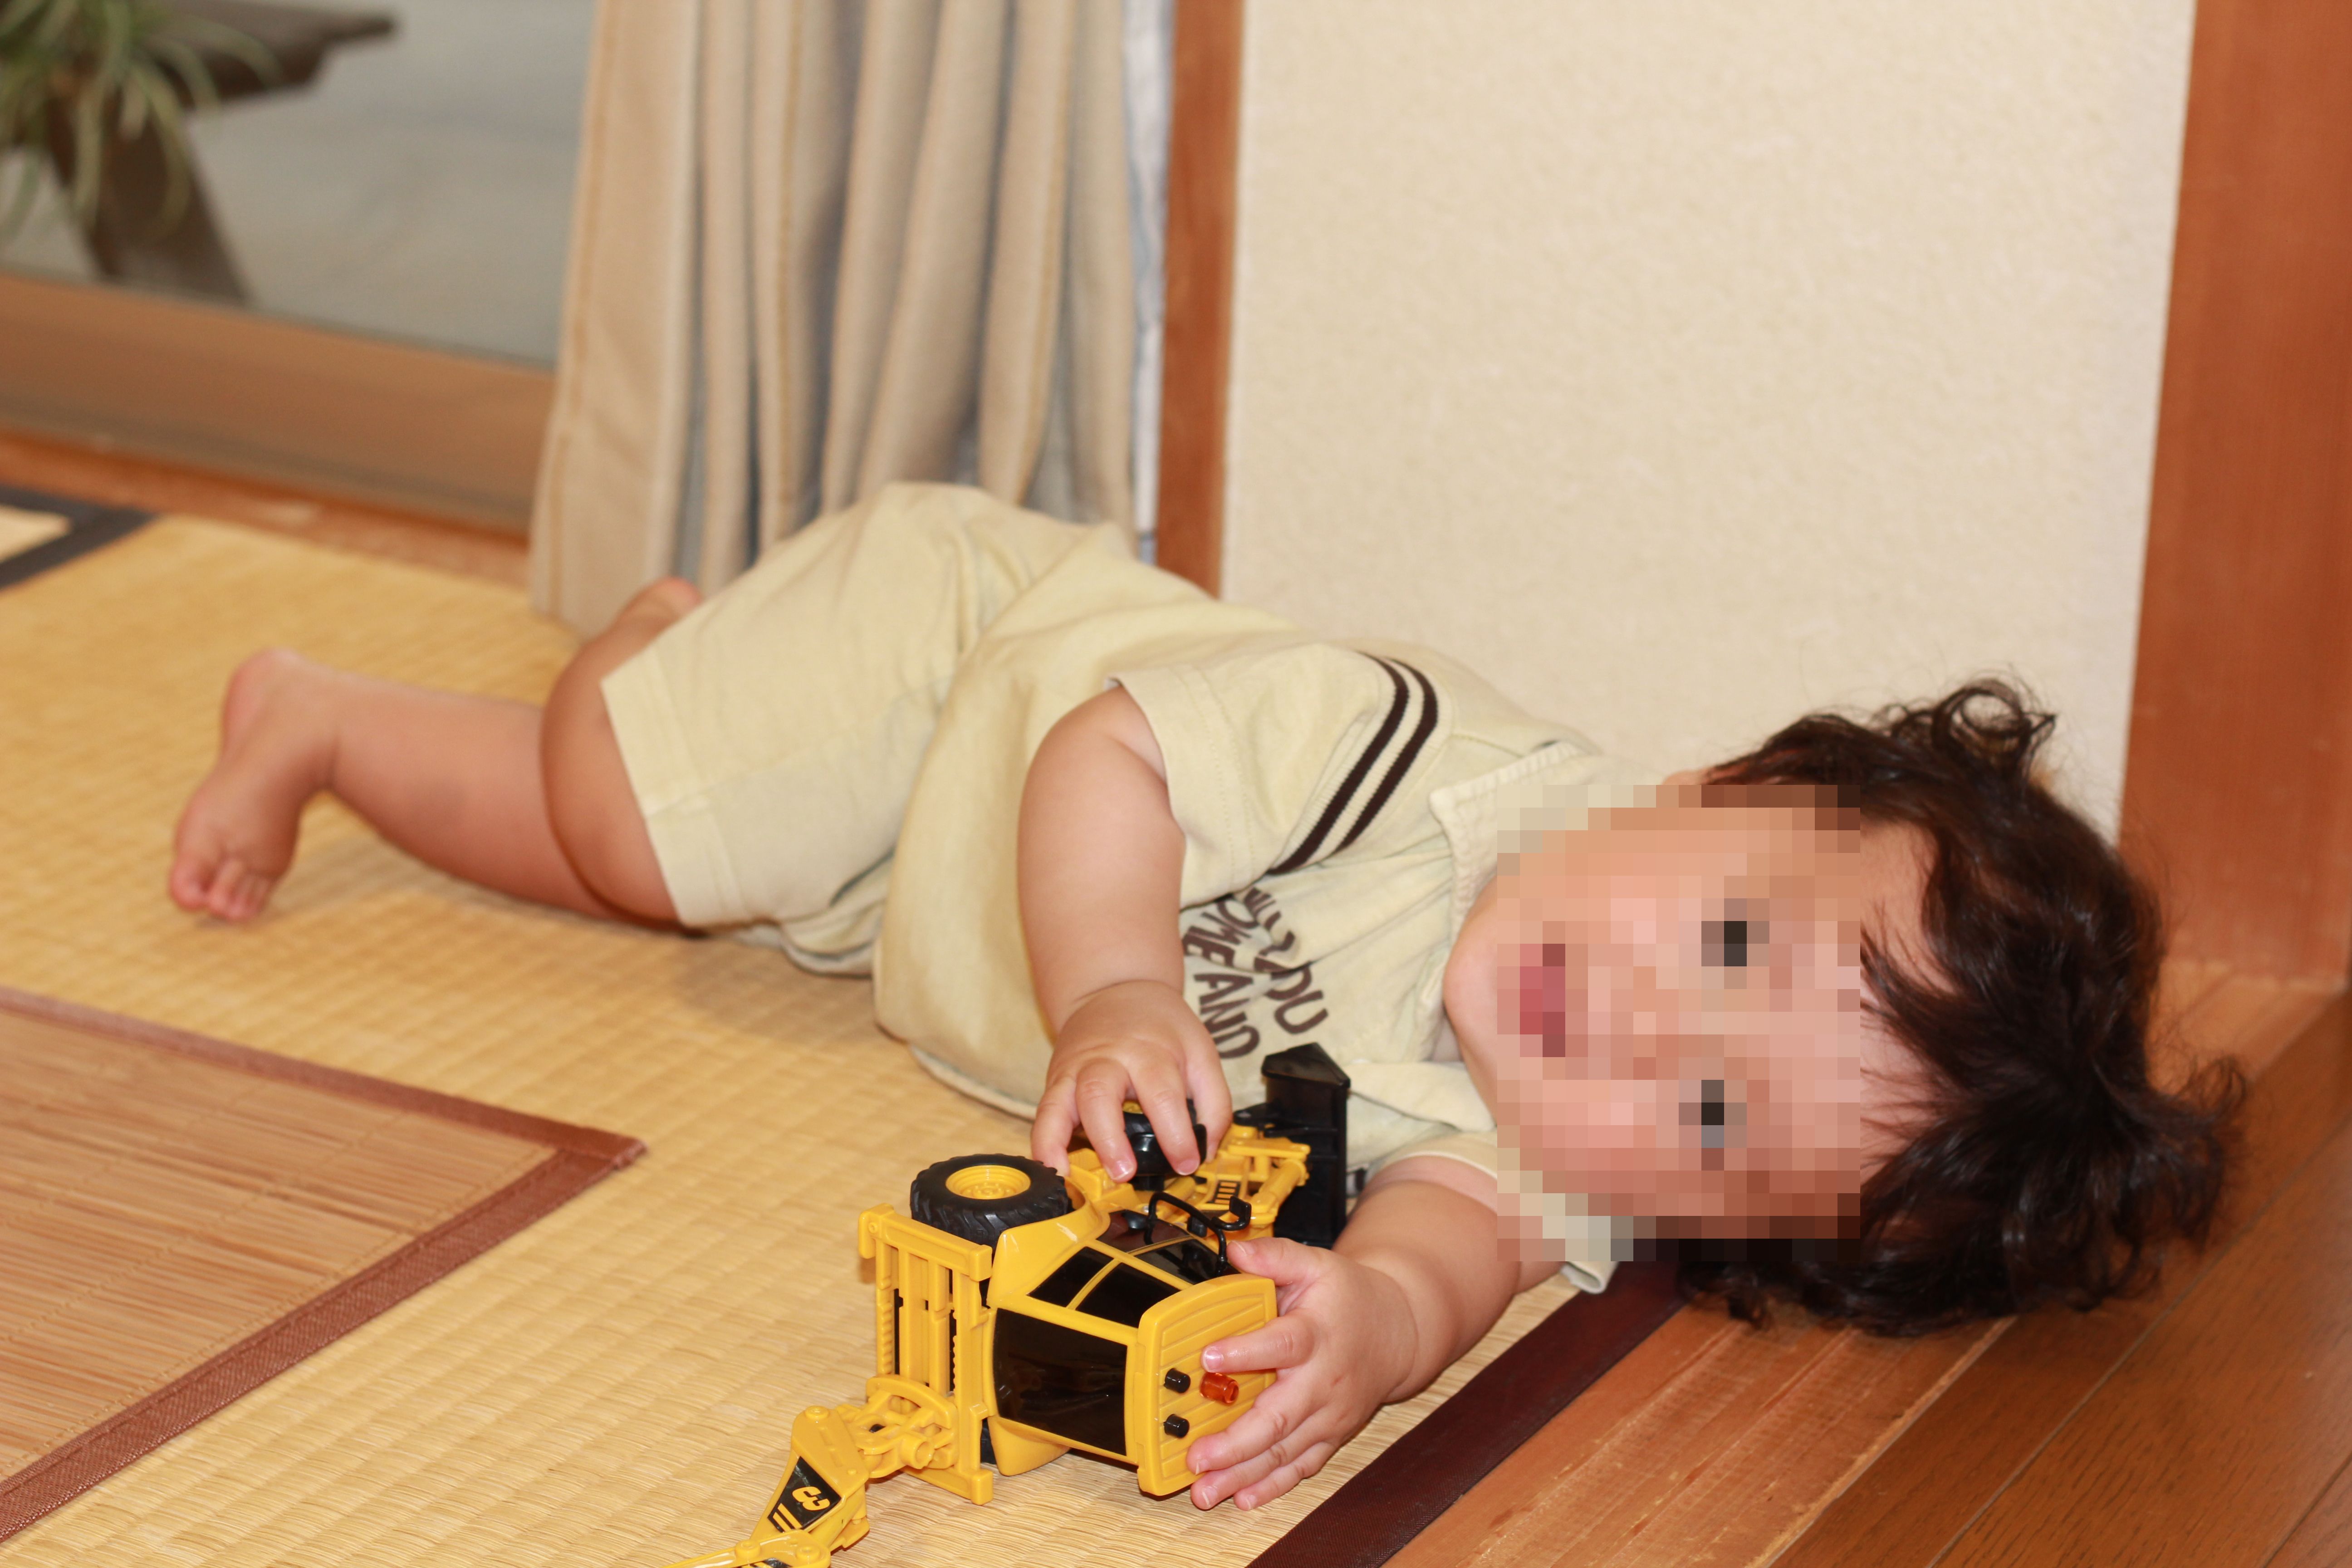 http://www.shintoko.jp/engblog/archives/images/2012/06/120625_eos60d013.JPG